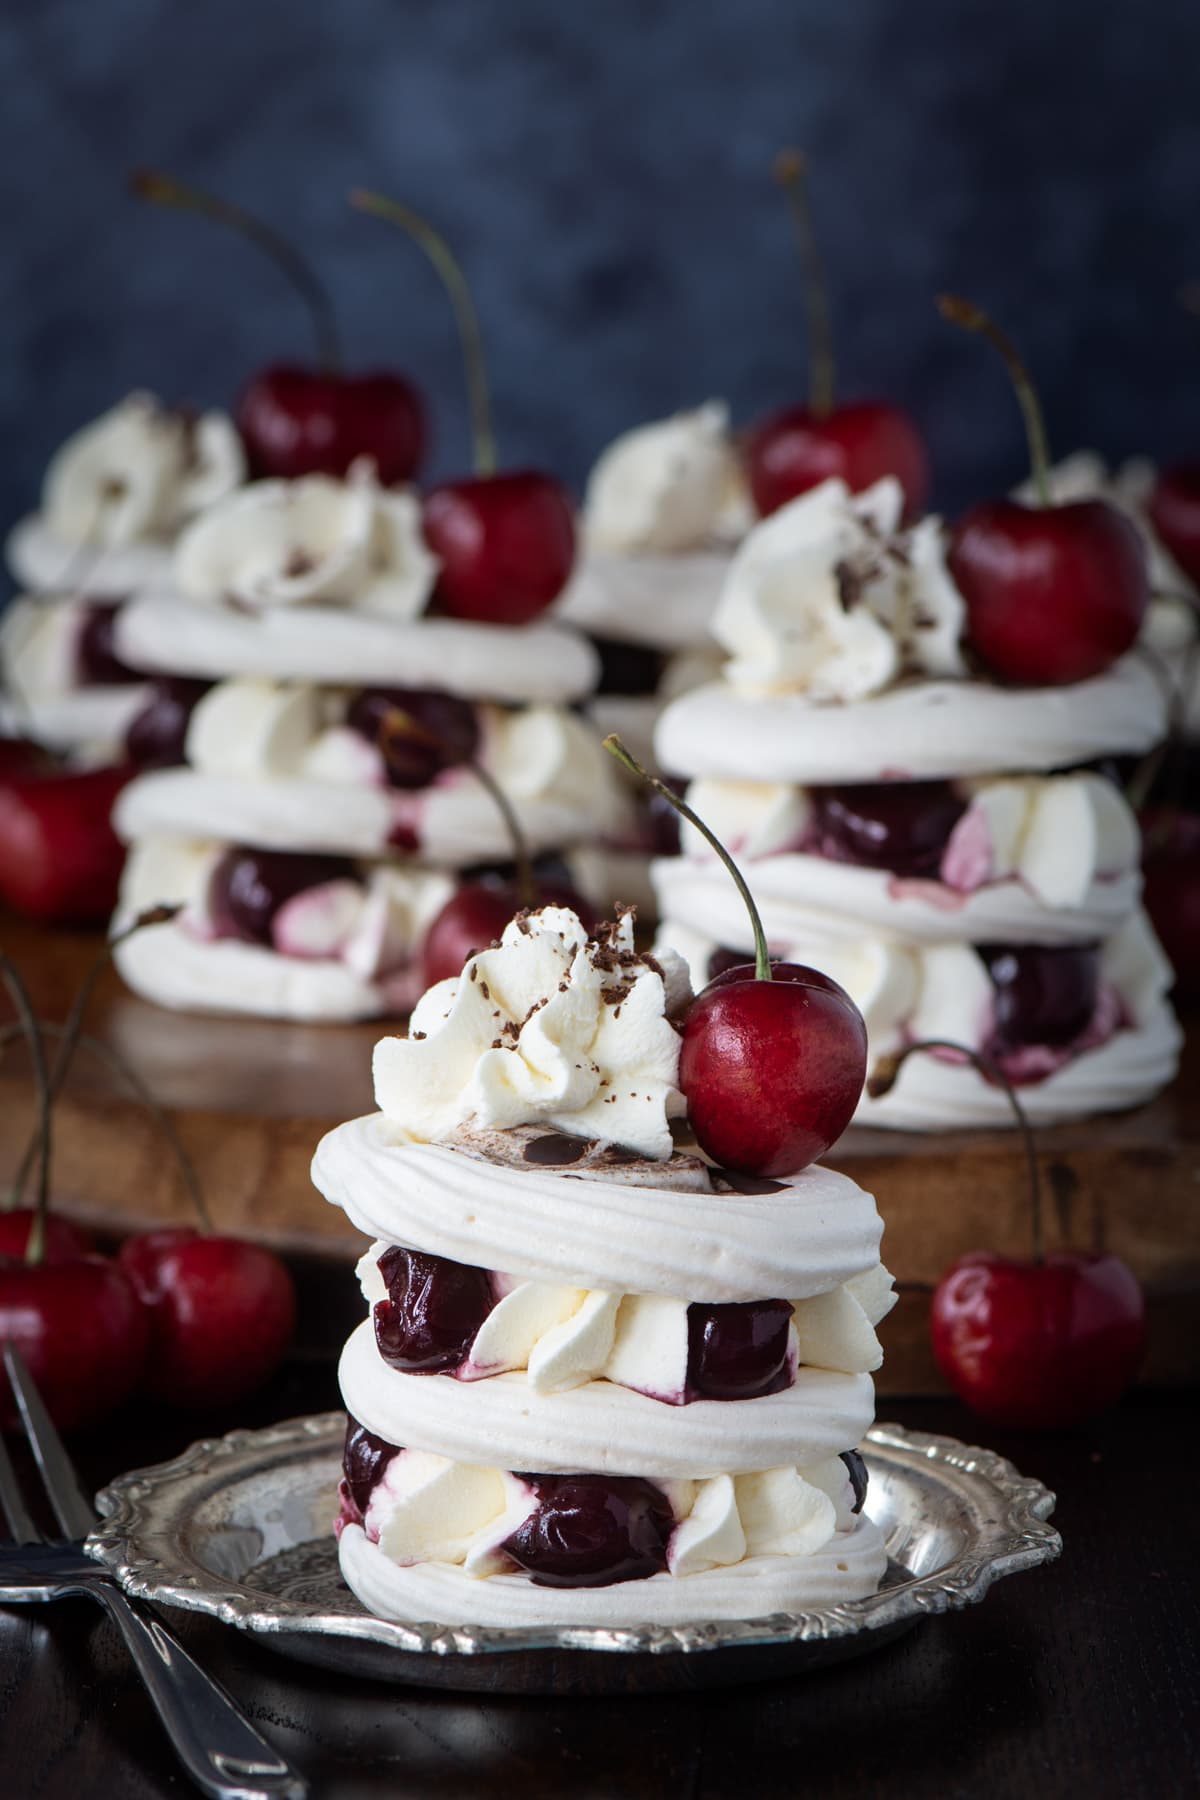 A Black Forest Meringue Stack. Three layers of meringue sandwiched with piped whipped cream and cherries.